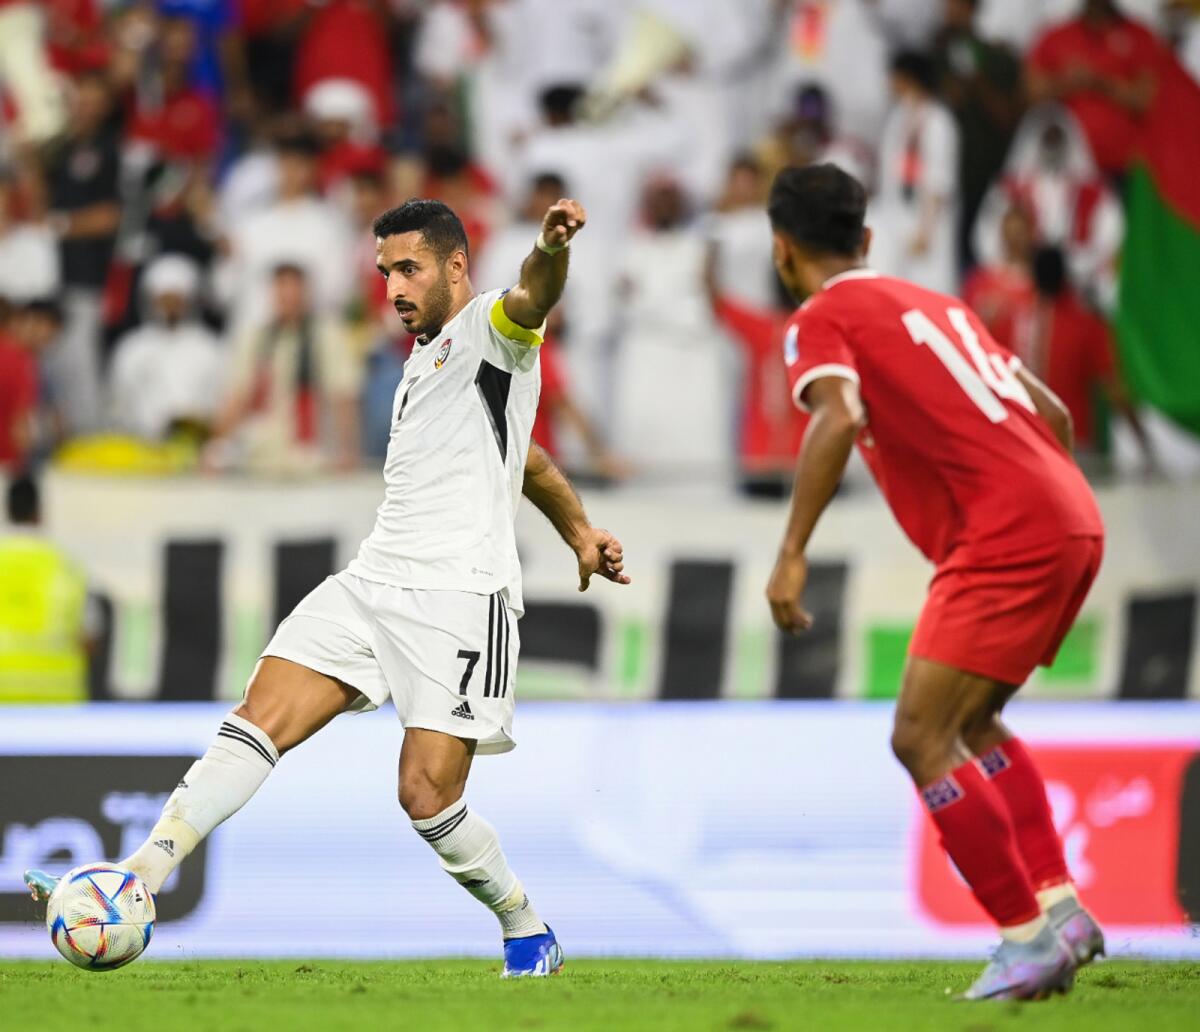 Ali Mabkhout controls the ball during the match against Nepal. — X